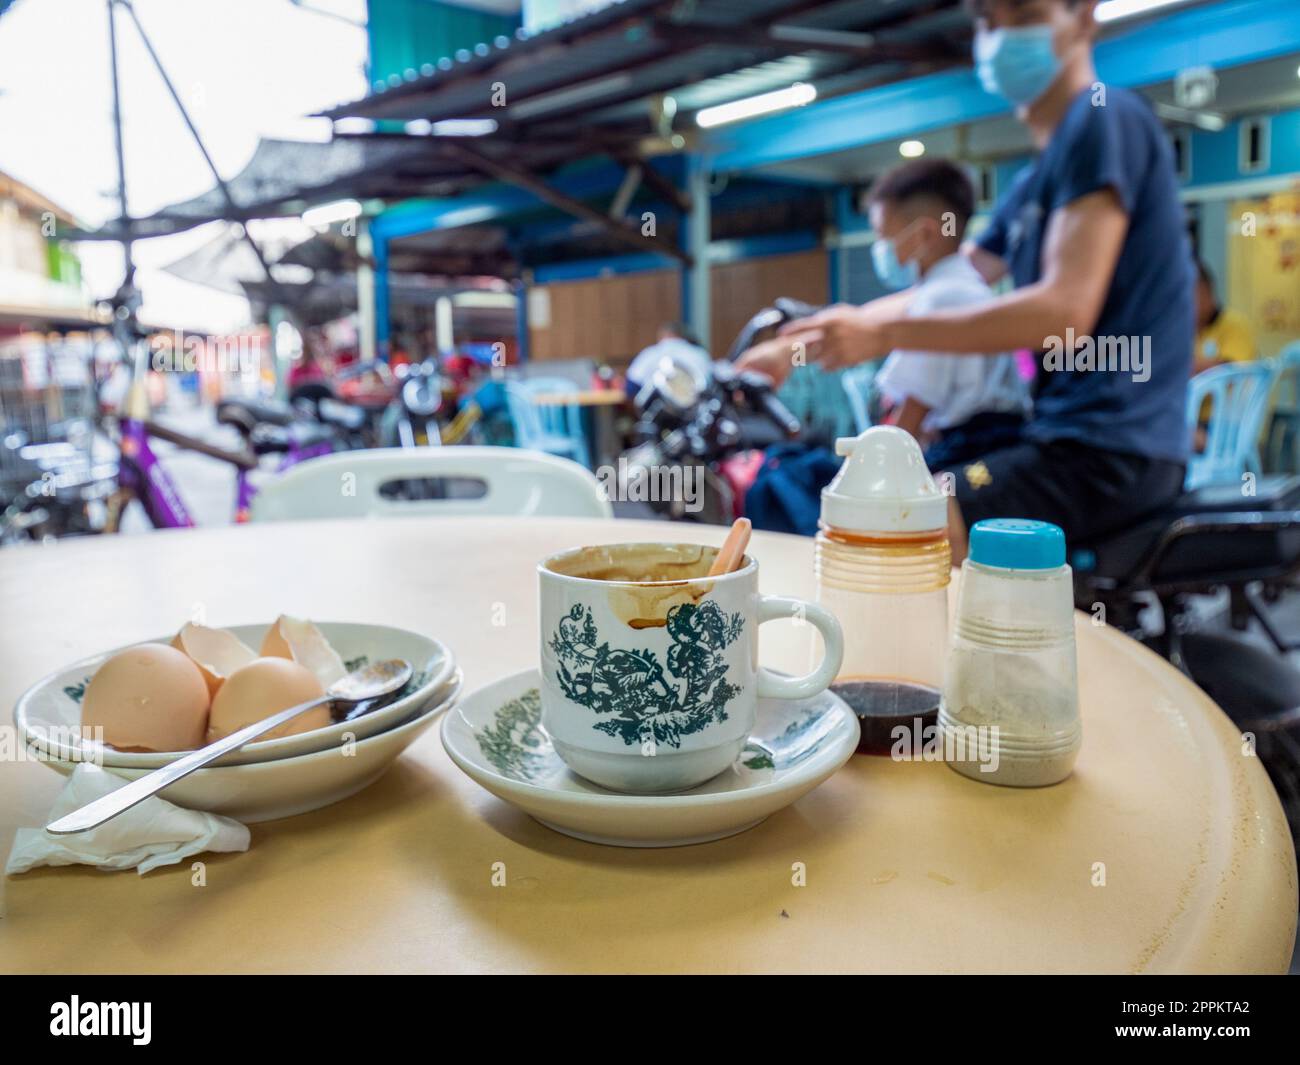 Breakfast on the idyllic Pulau Ketam, Malaysia. Pulau Ketam is near Port Klang and was built by Chinese fishermen centuries ago. Pulau means island and Ketam means crabs. This islands has millions of tiny crabs! The island is home to two predominantly Chi Stock Photo